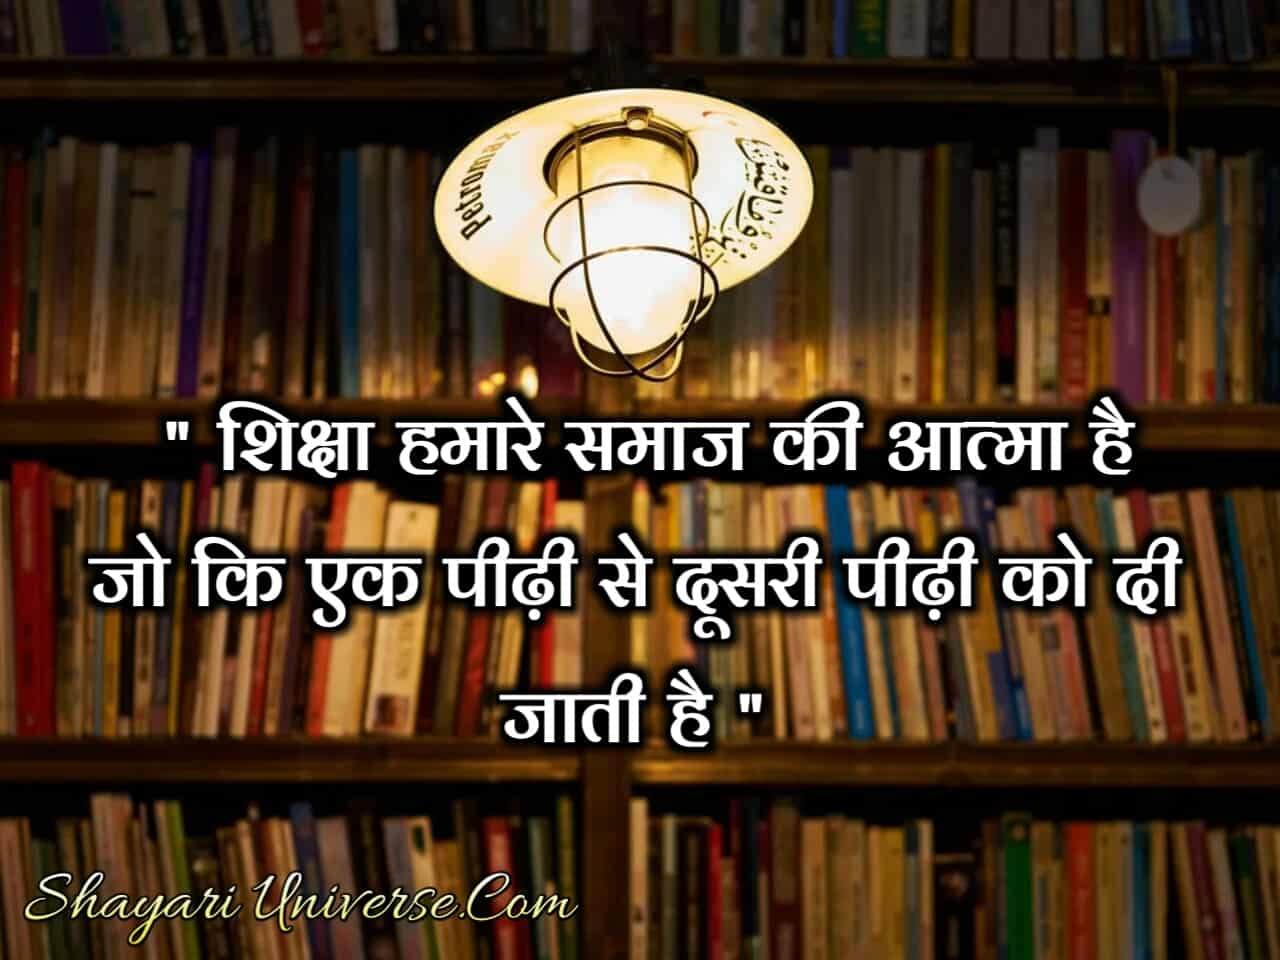 New Educational Thoughts In Hindi-Images